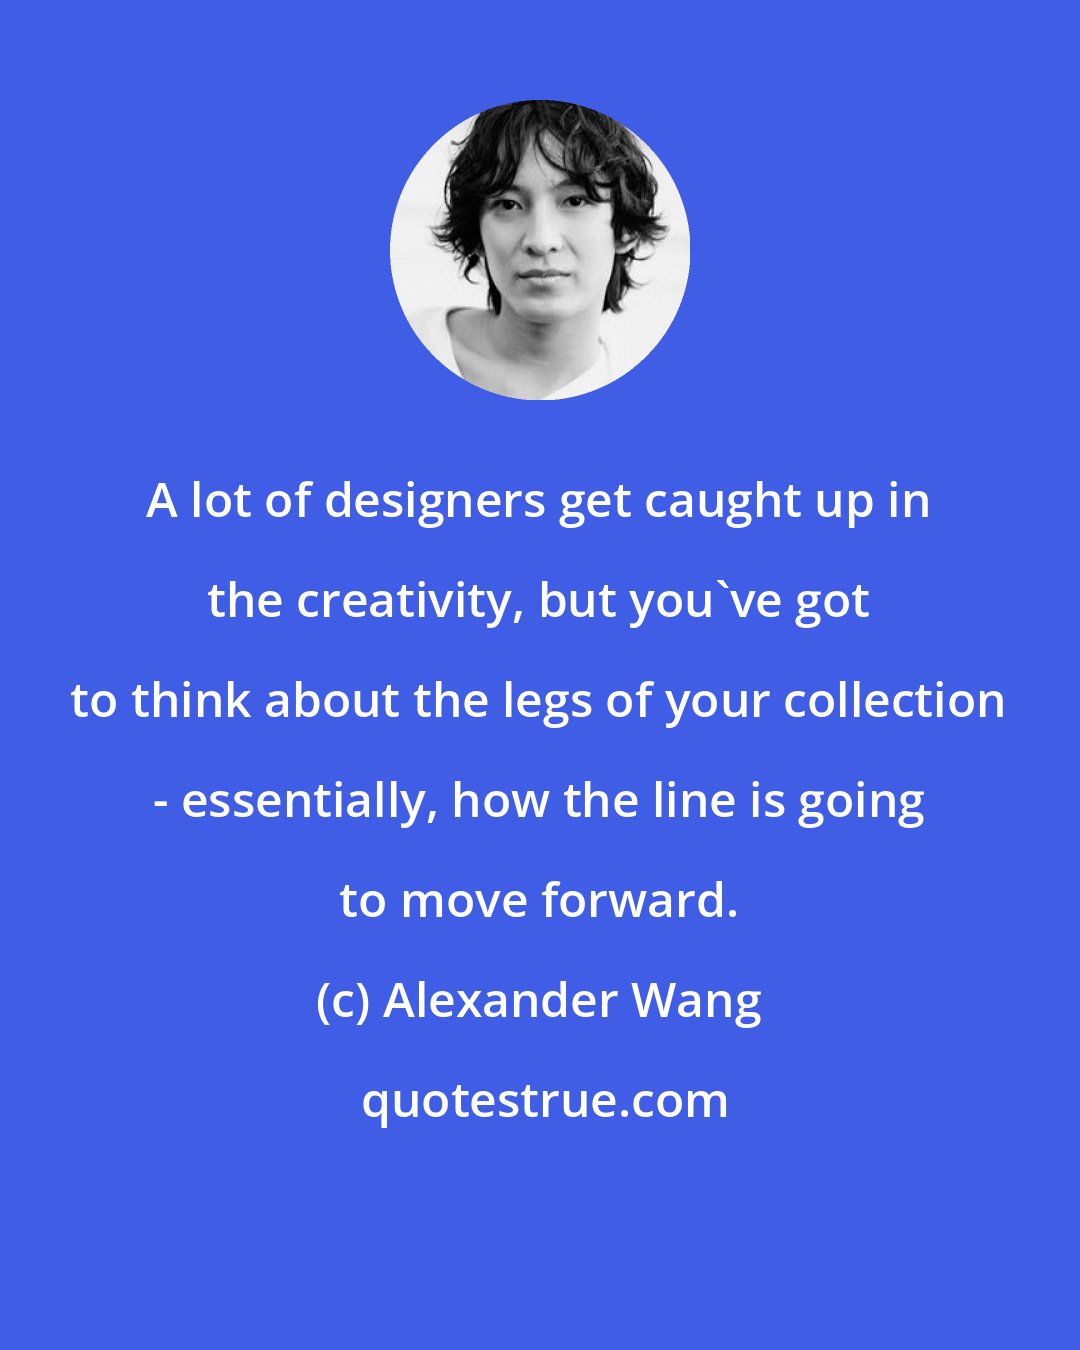 Alexander Wang: A lot of designers get caught up in the creativity, but you've got to think about the legs of your collection - essentially, how the line is going to move forward.